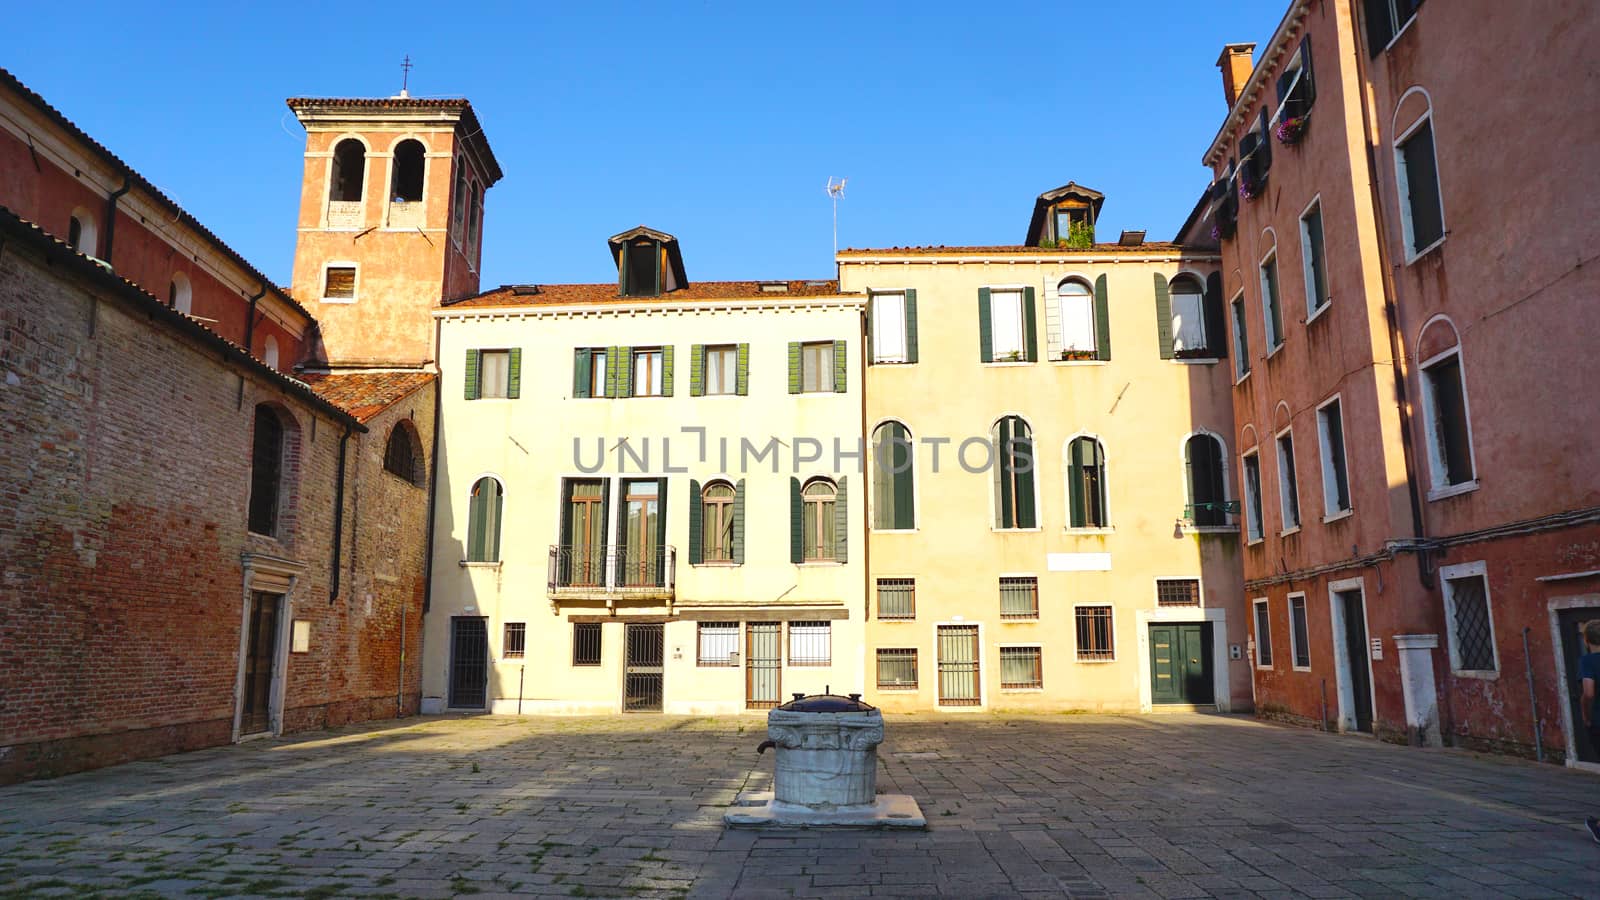 court with ancient buildings in Venice, Italy